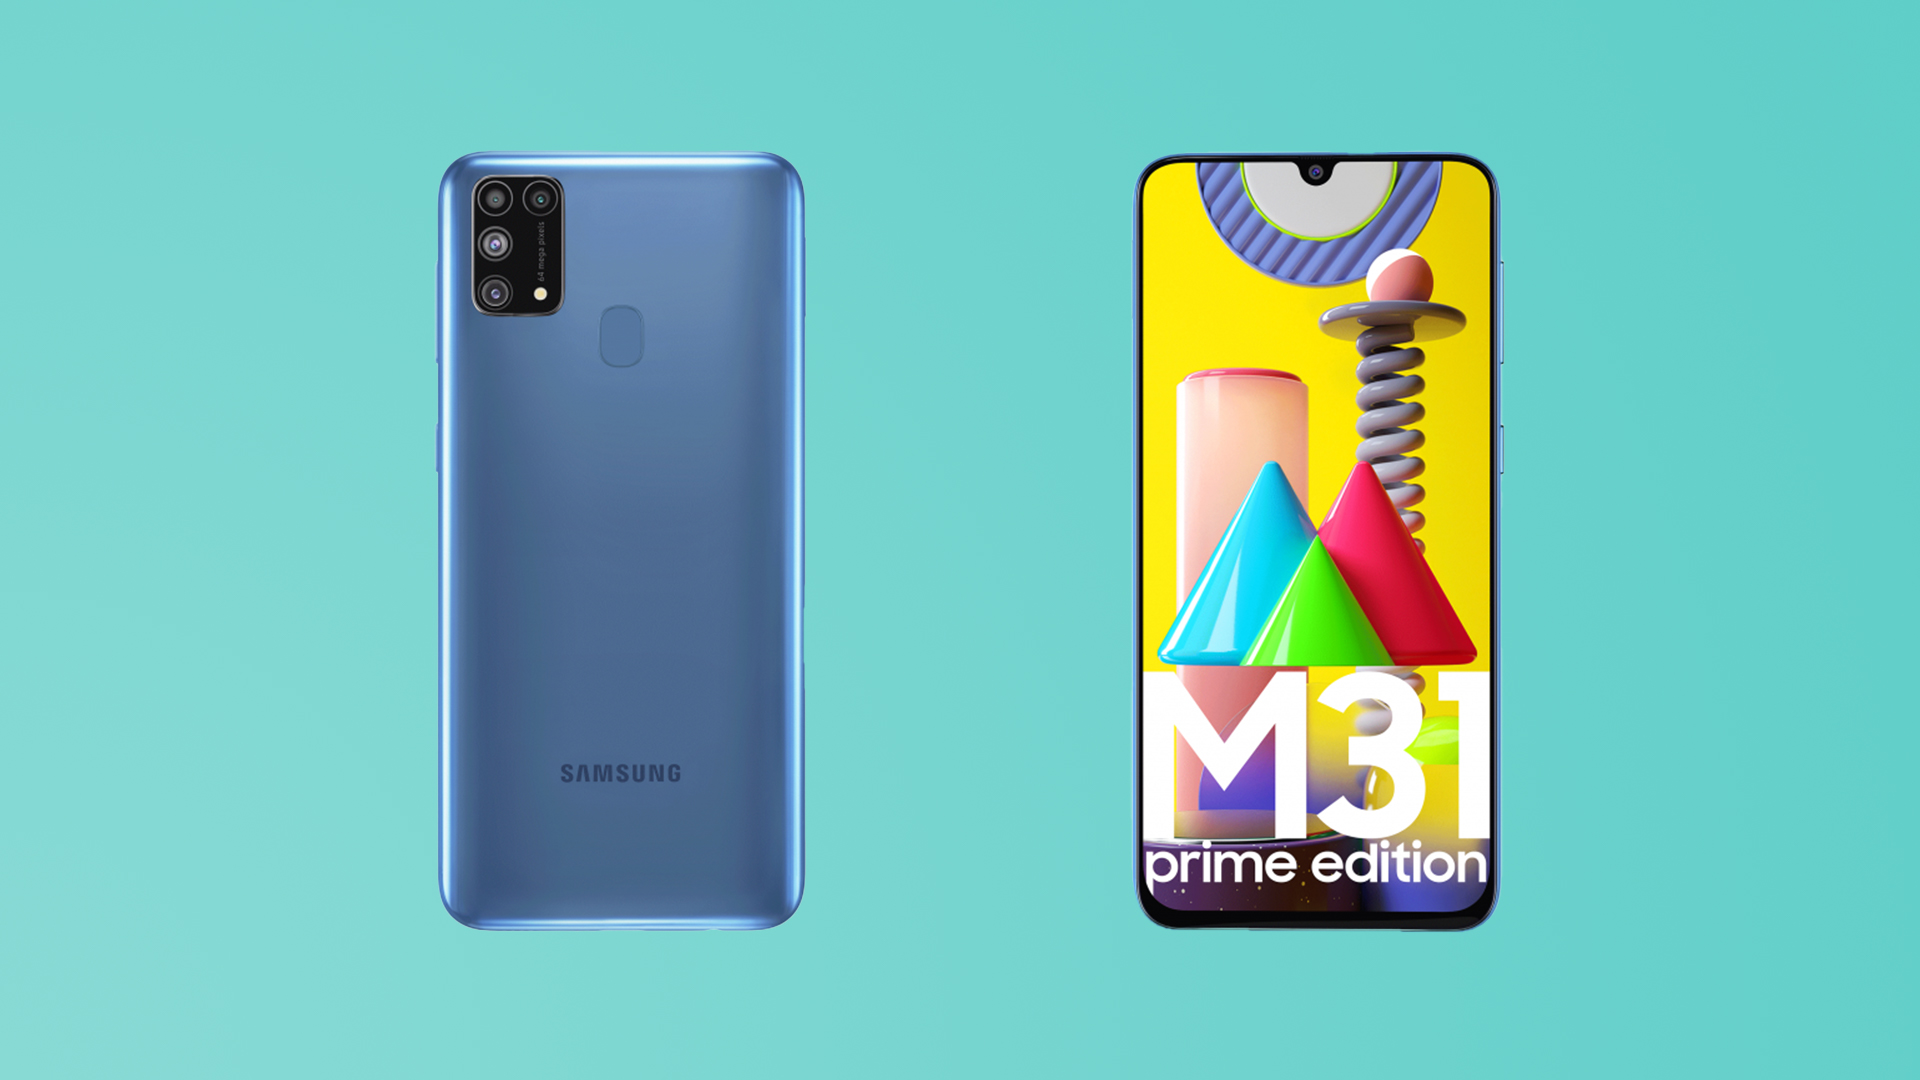 Galaxy M31 Prime Edition comes with a bunch of pre-loaded Amazon apps